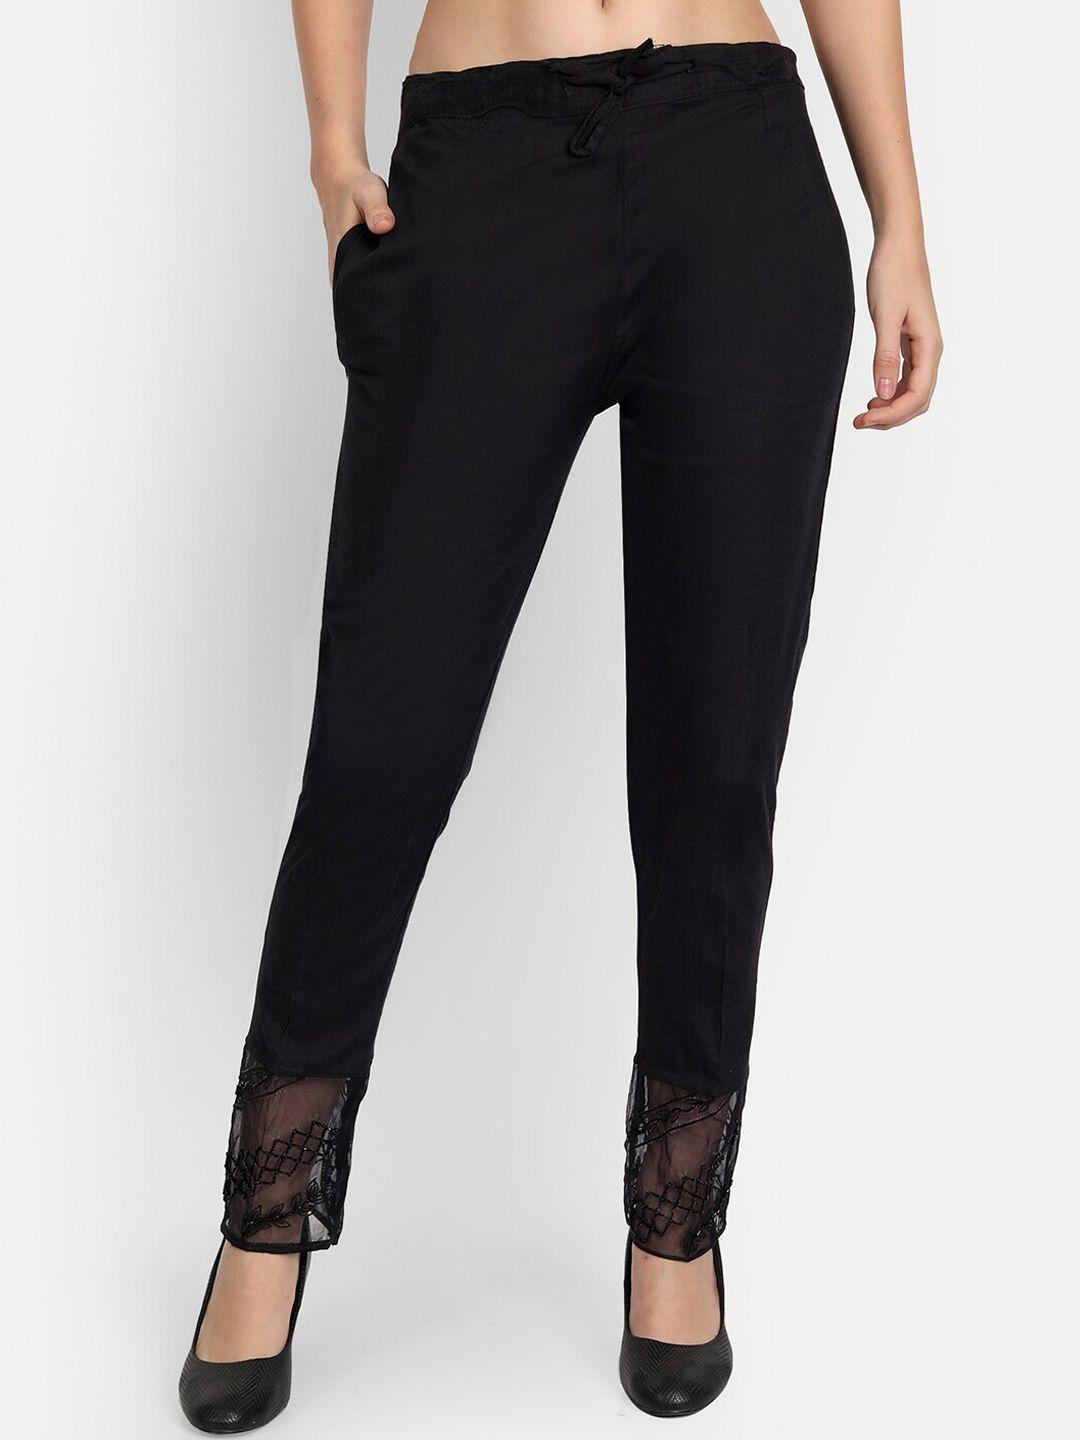 bcz style women black regular fit stretchable trouser